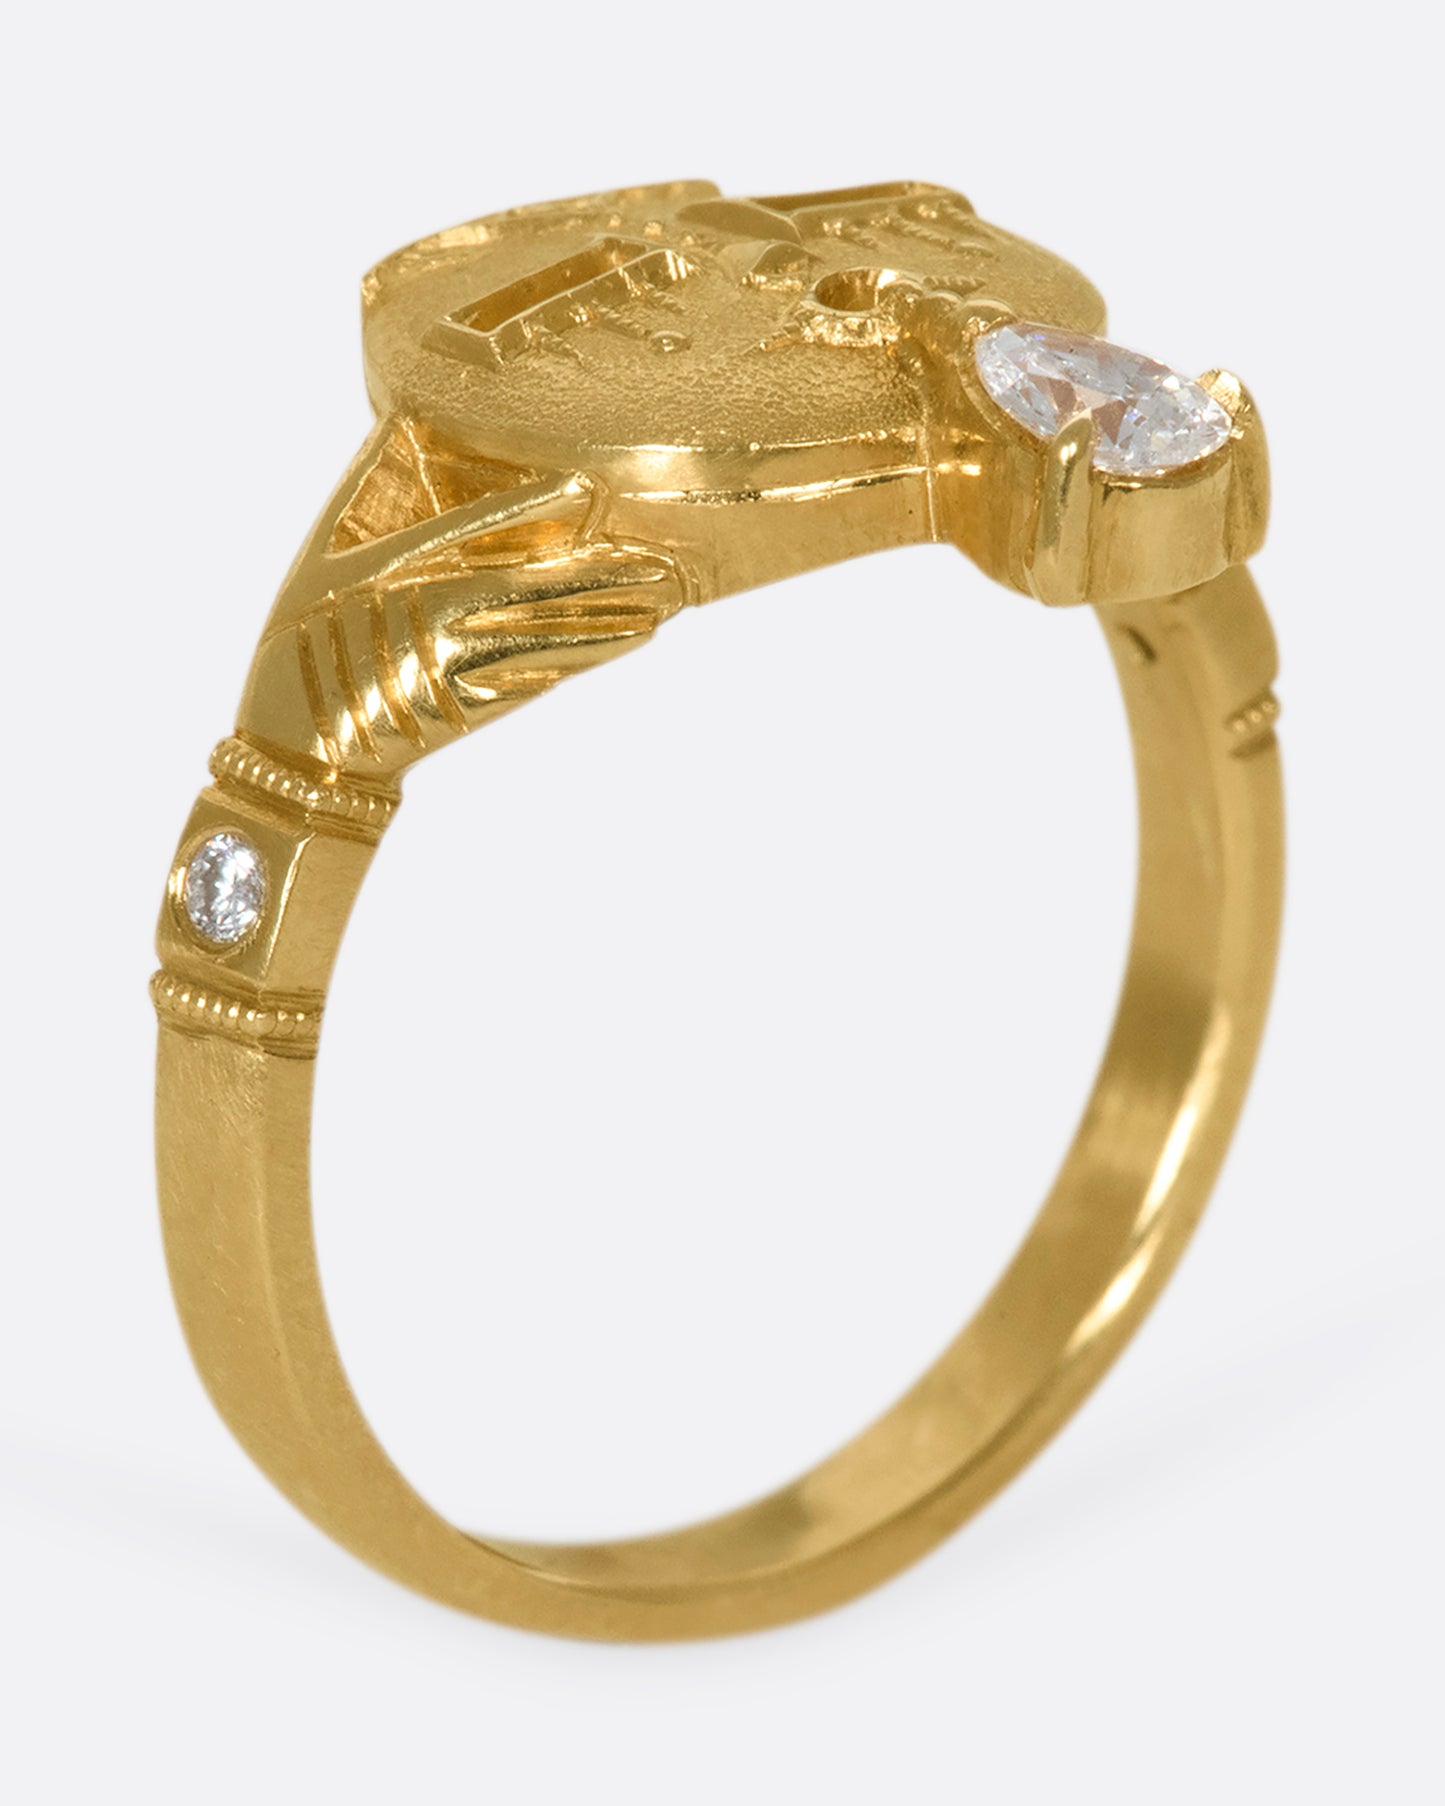 A gold ring with a face and a pear shaped diamond tongue standing upright on its band.